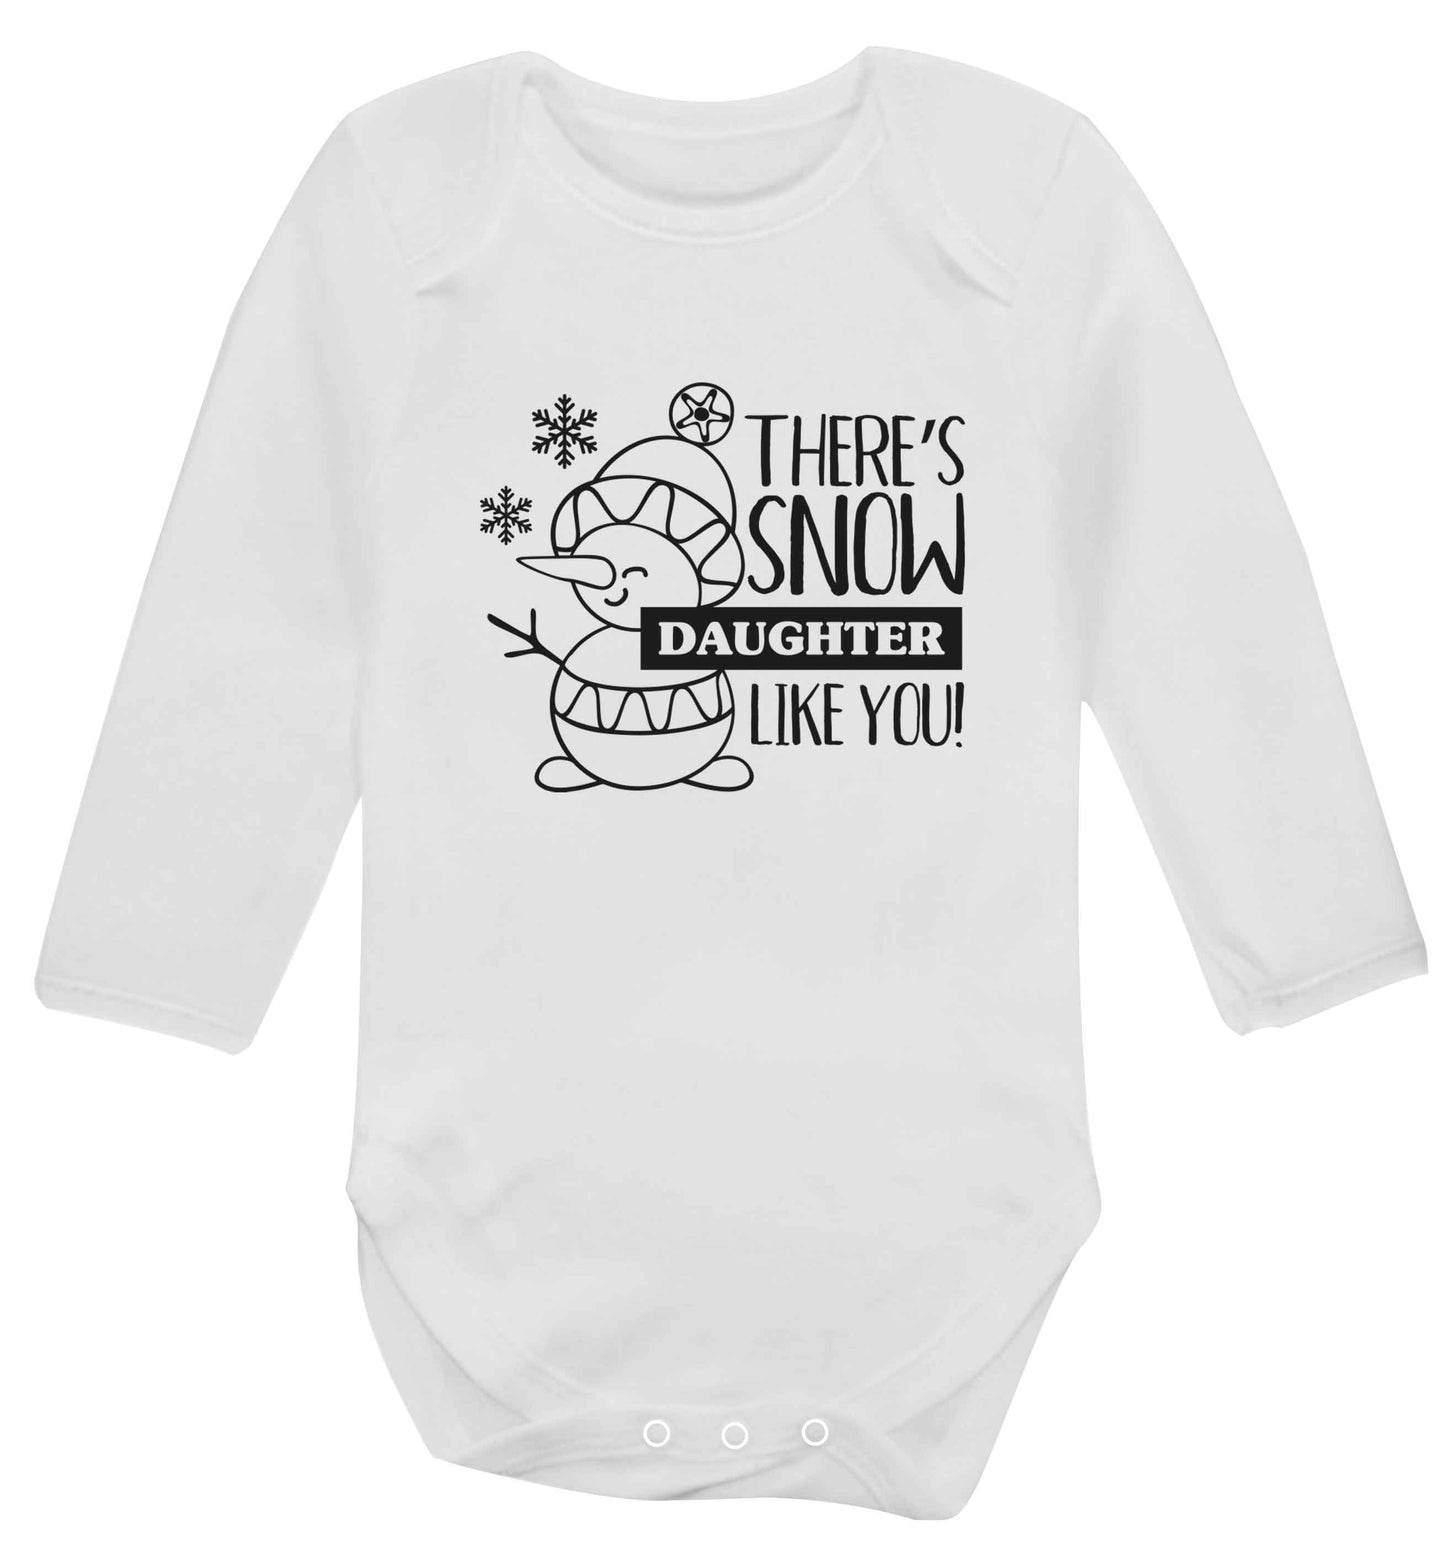 There's snow daughter like you baby vest long sleeved white 6-12 months